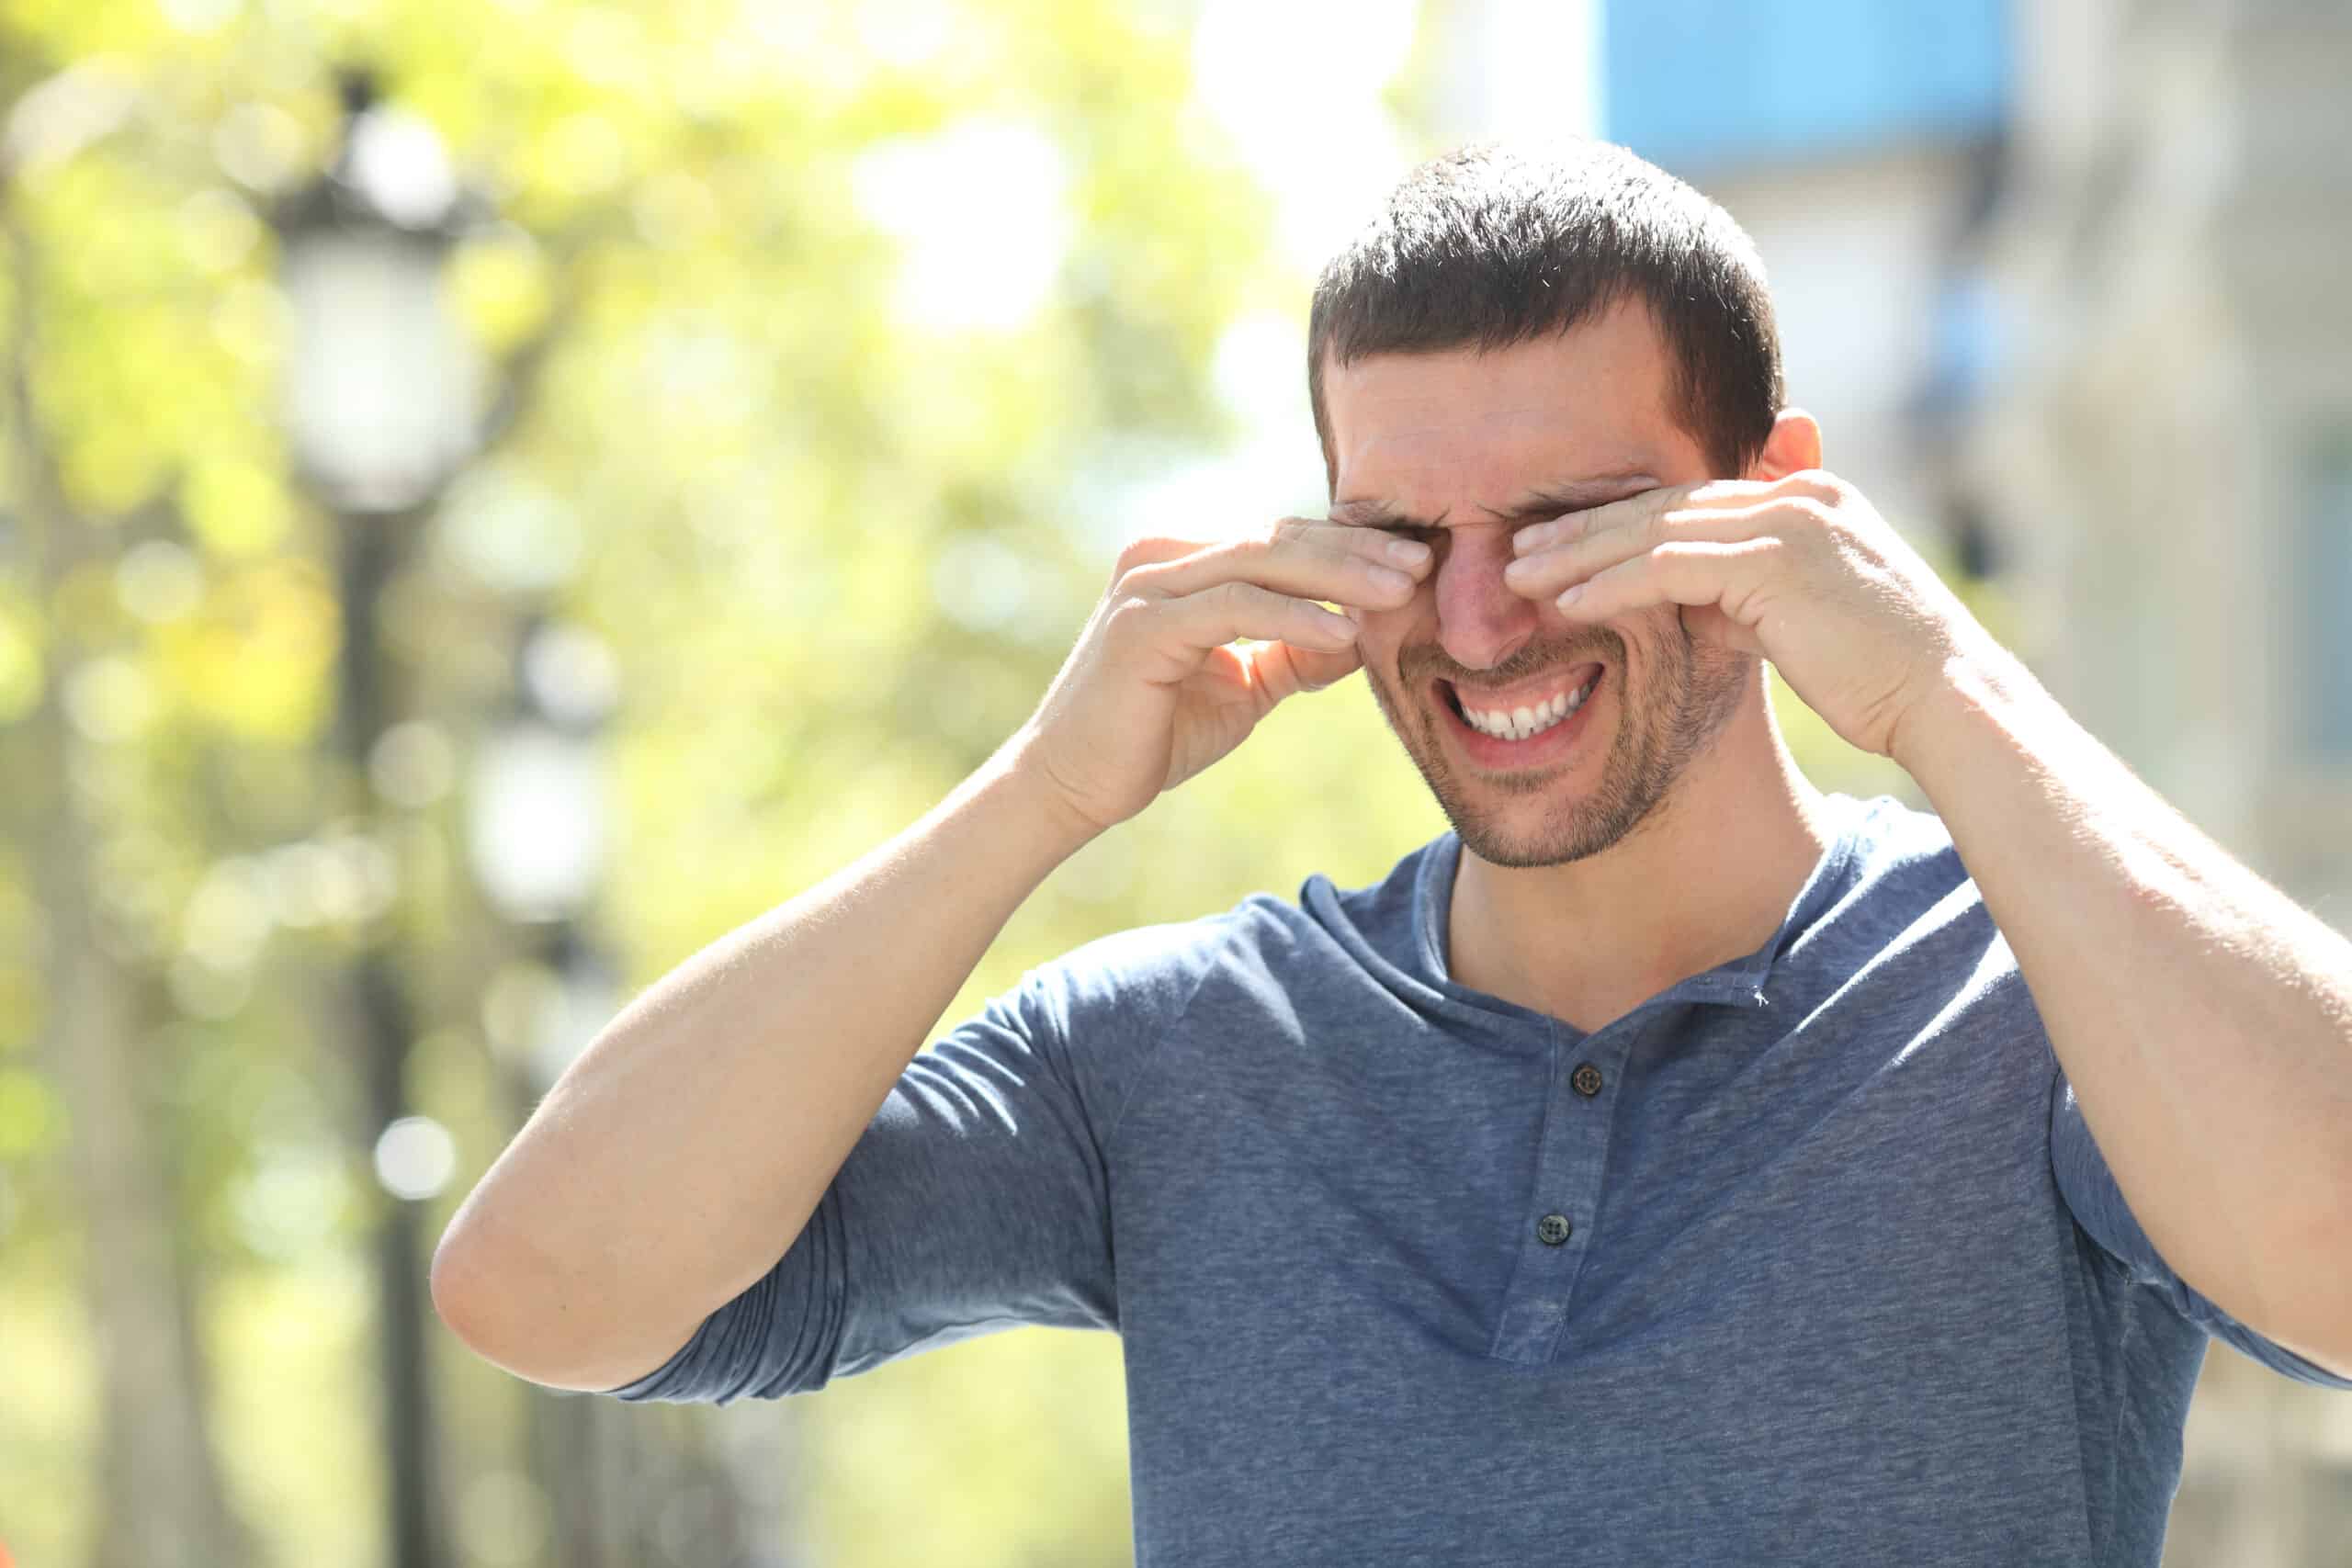 Adult man scratching itchy eyes in the street